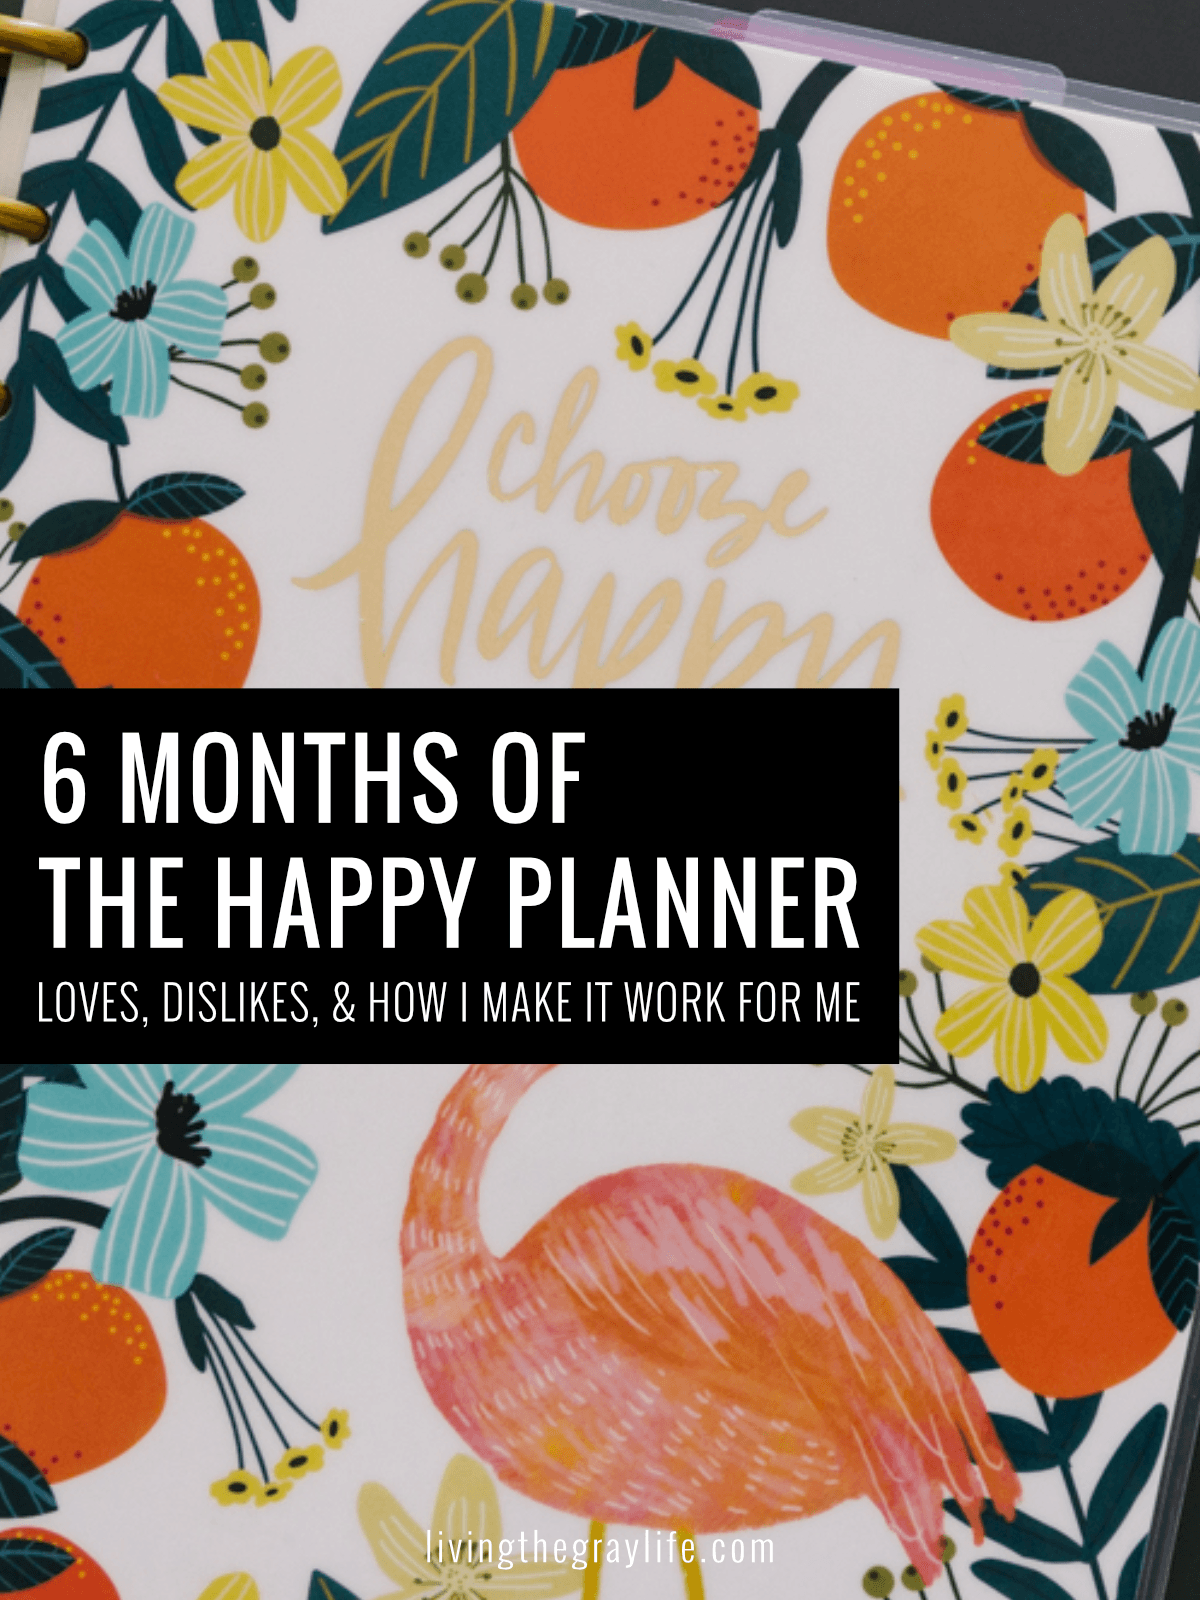 My Experience with The Happy Planner after 6 Months